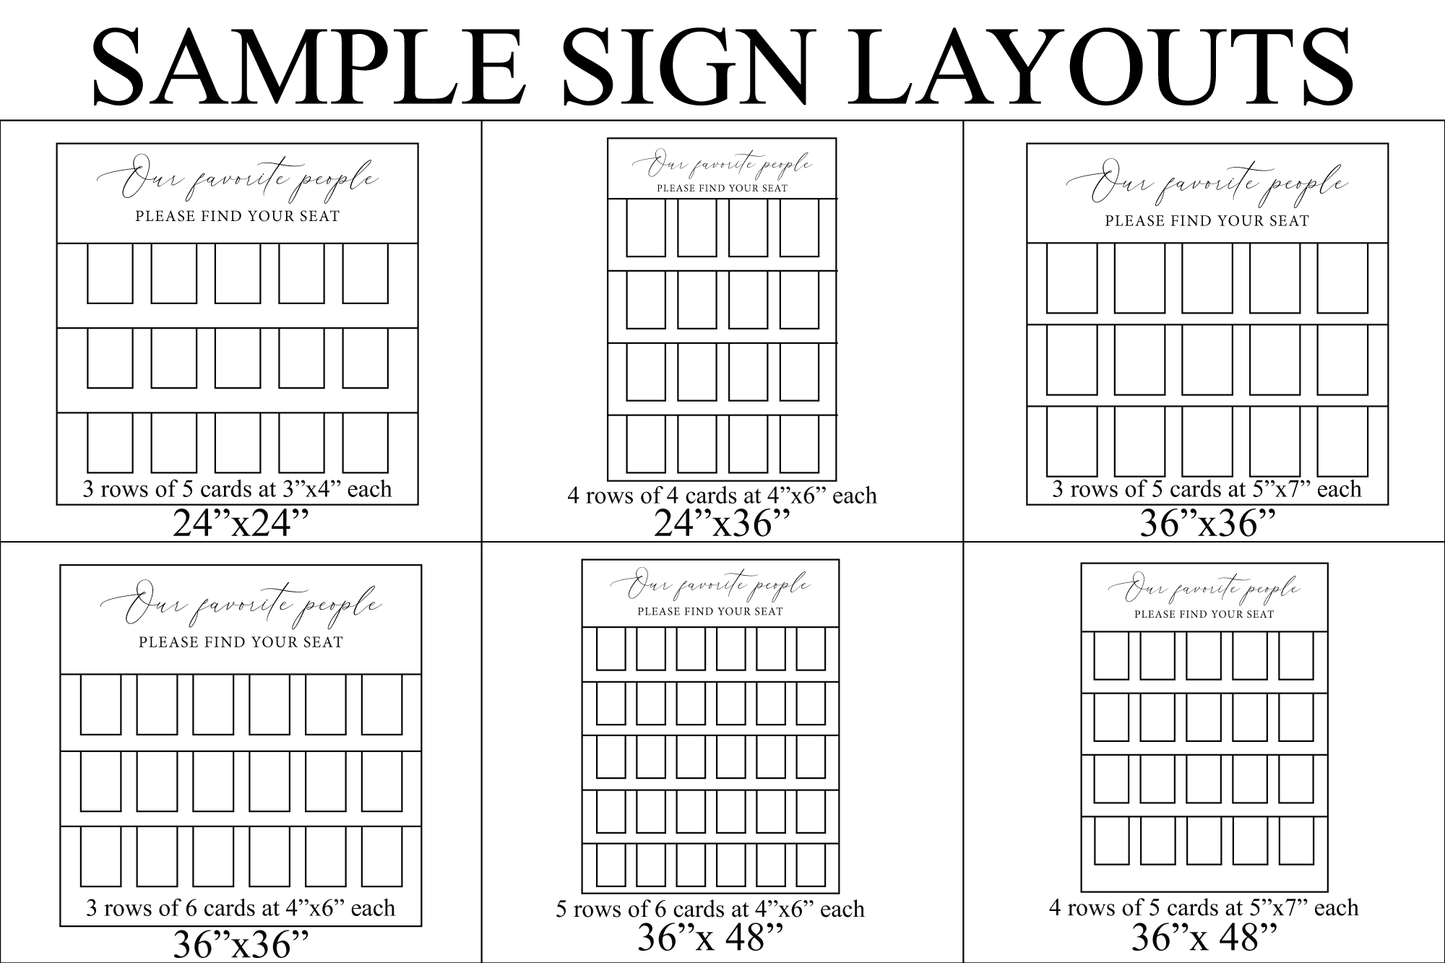 sample sign layouts for wedding escort cards and wedding reception place cards 